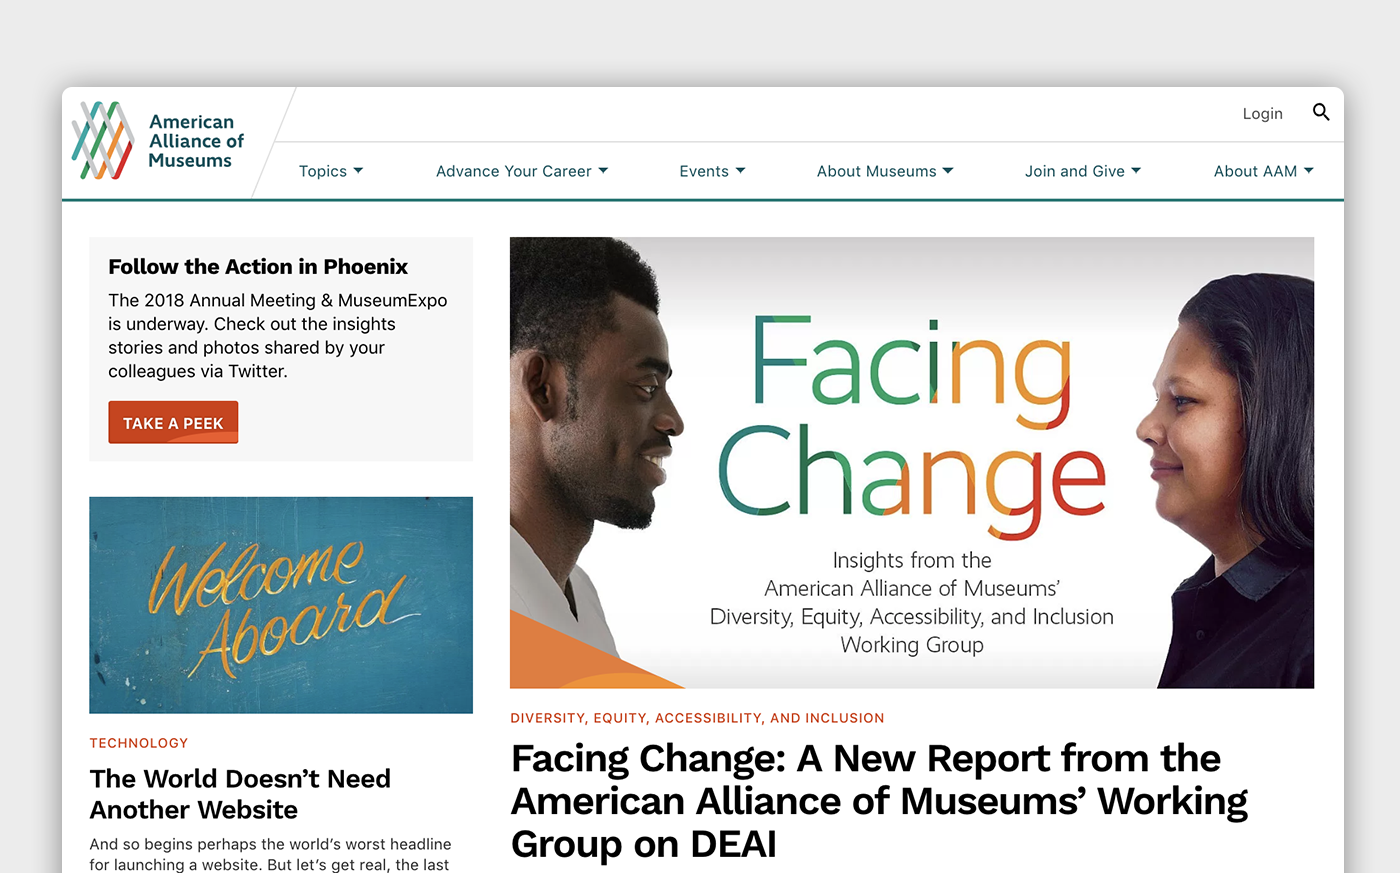 The main page of AAM with navigation, featured article, and additional content